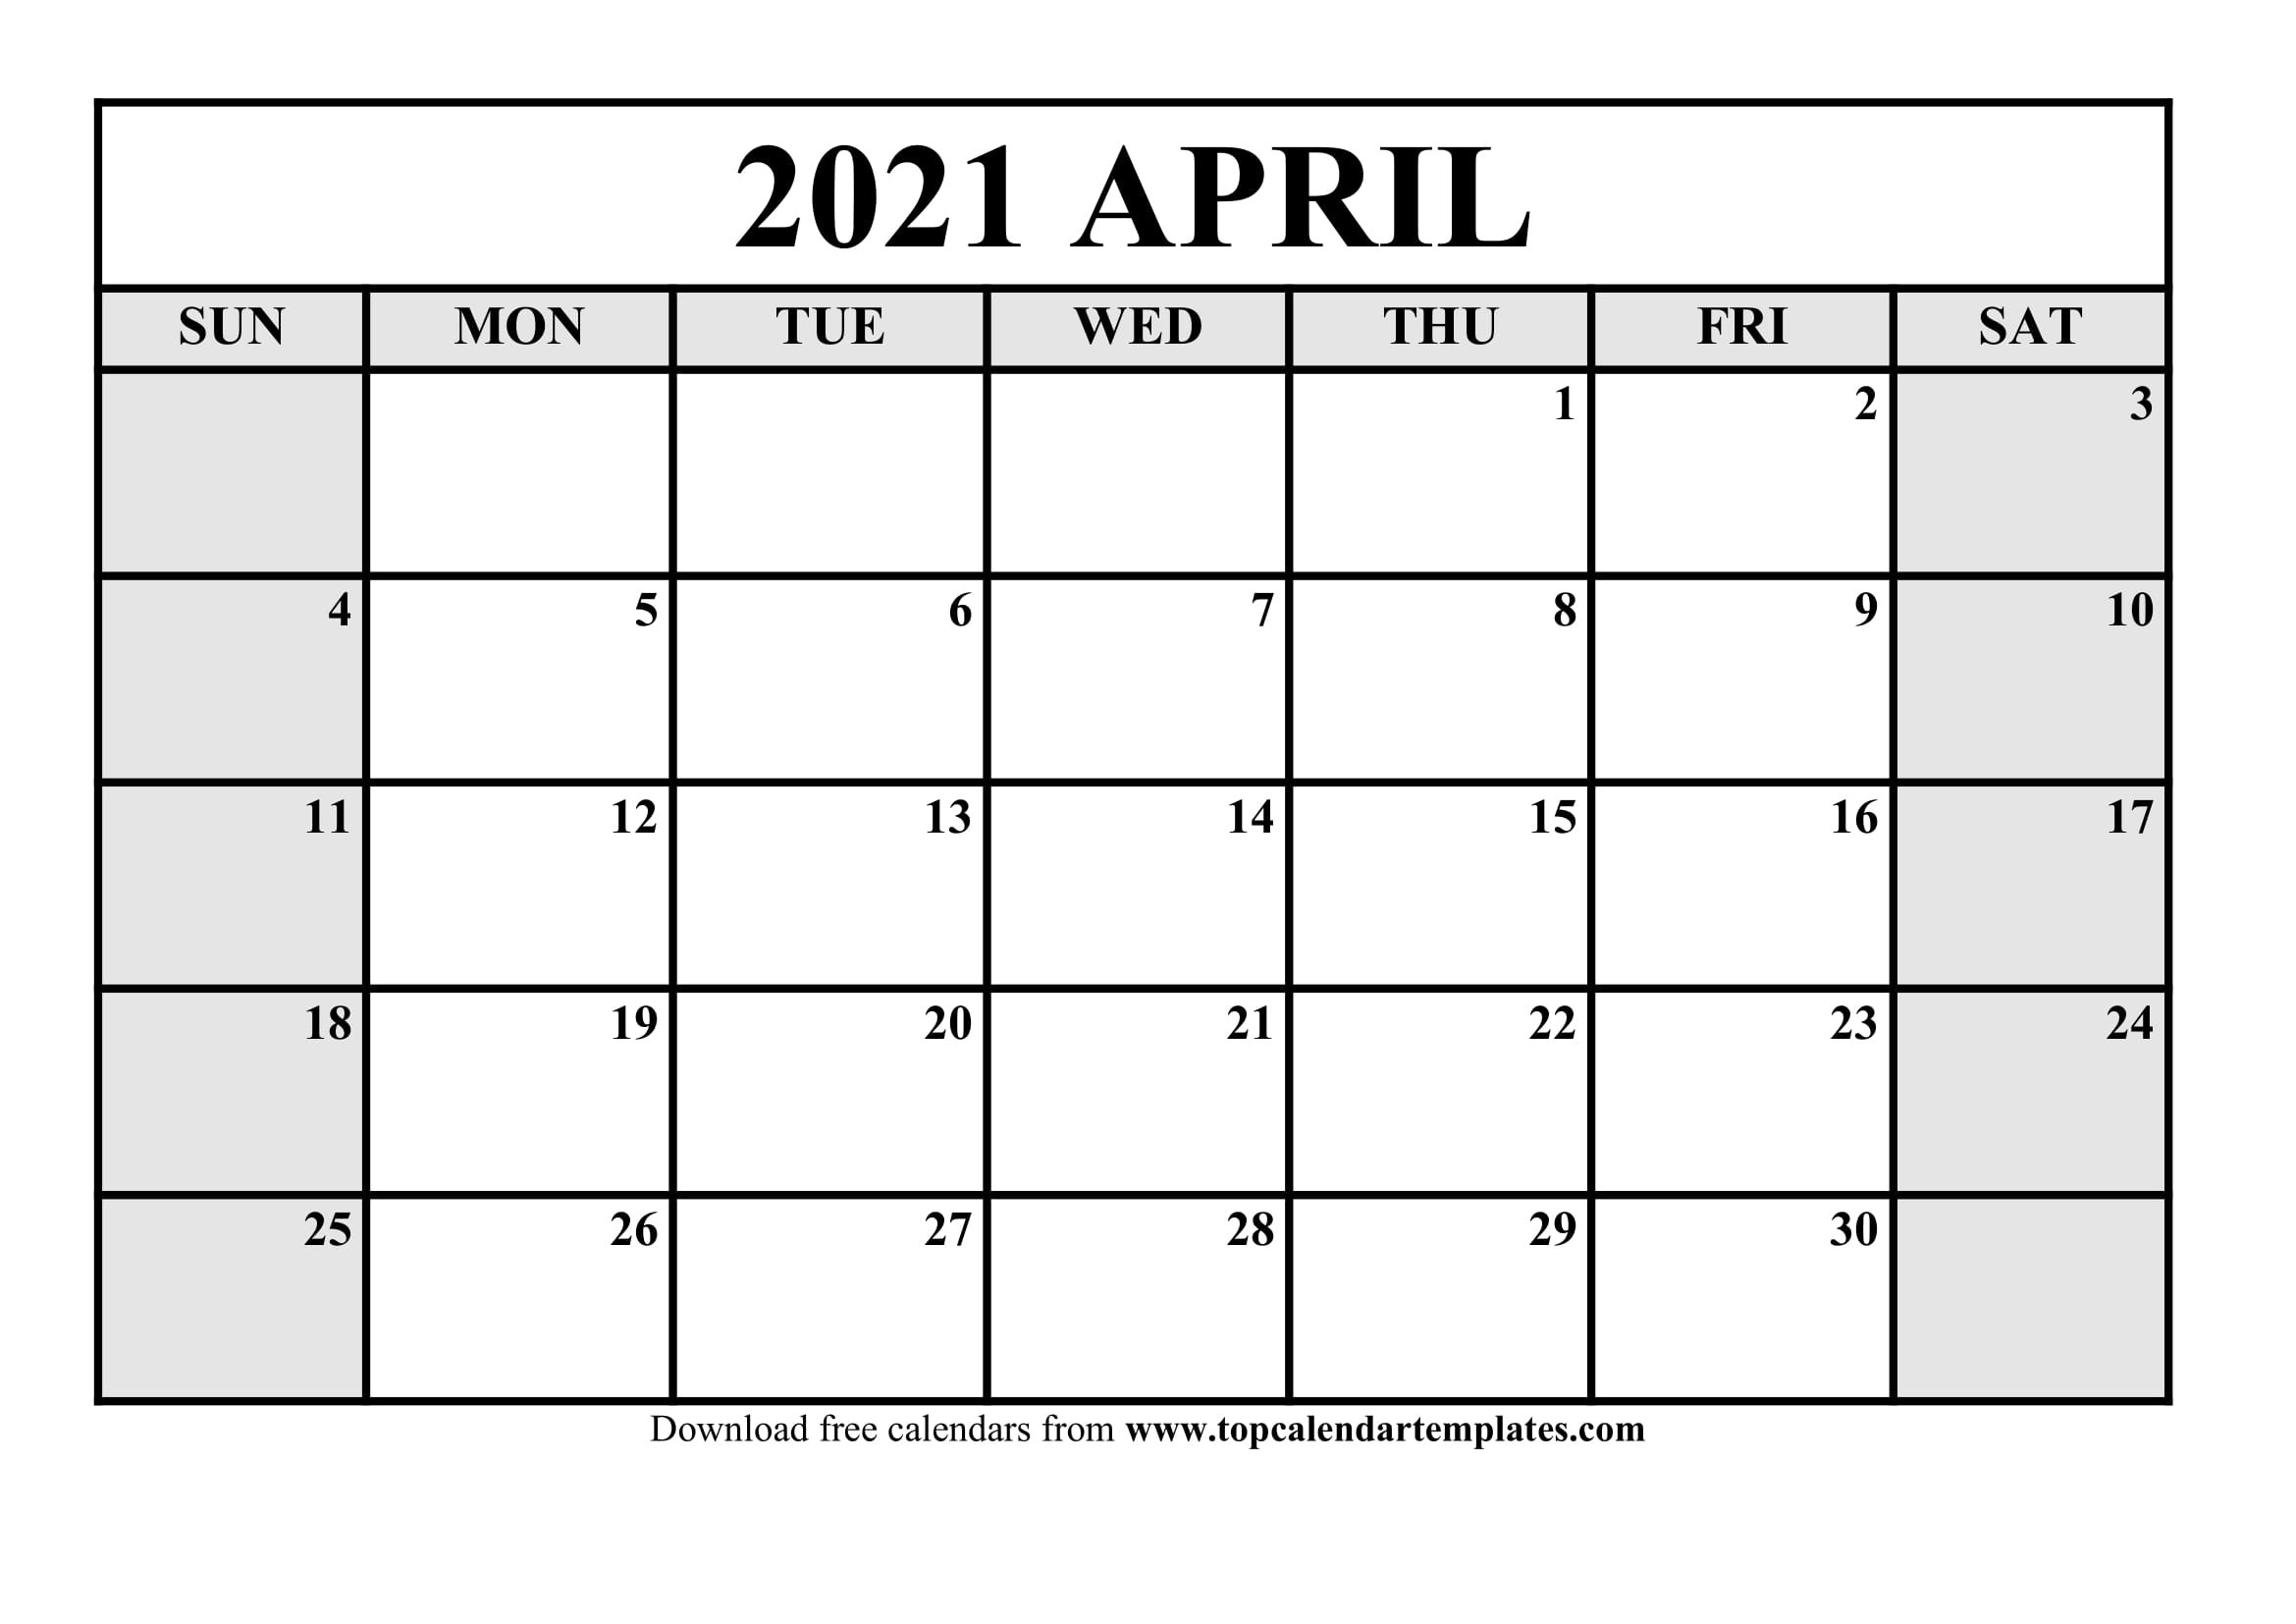 Free April 2021 Calendar Printable - Monthly Template-Printable Calendar 2021 Monthly